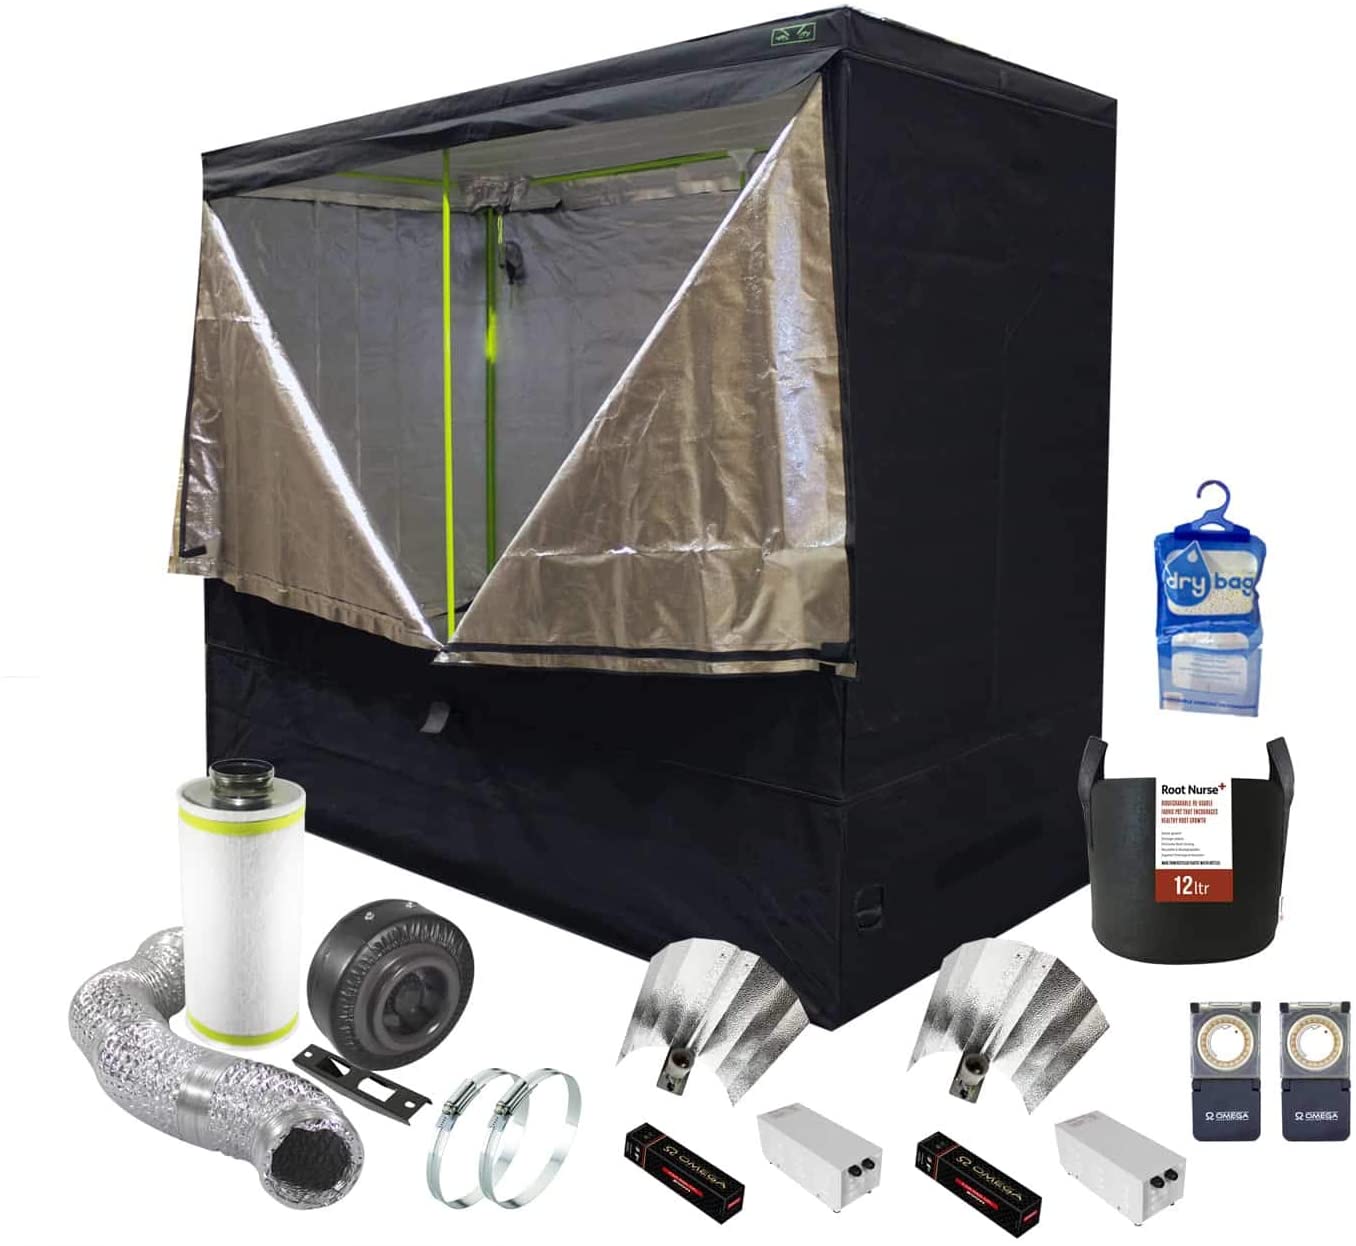 A basic urban tent kit for indoor hydroponic plant growth